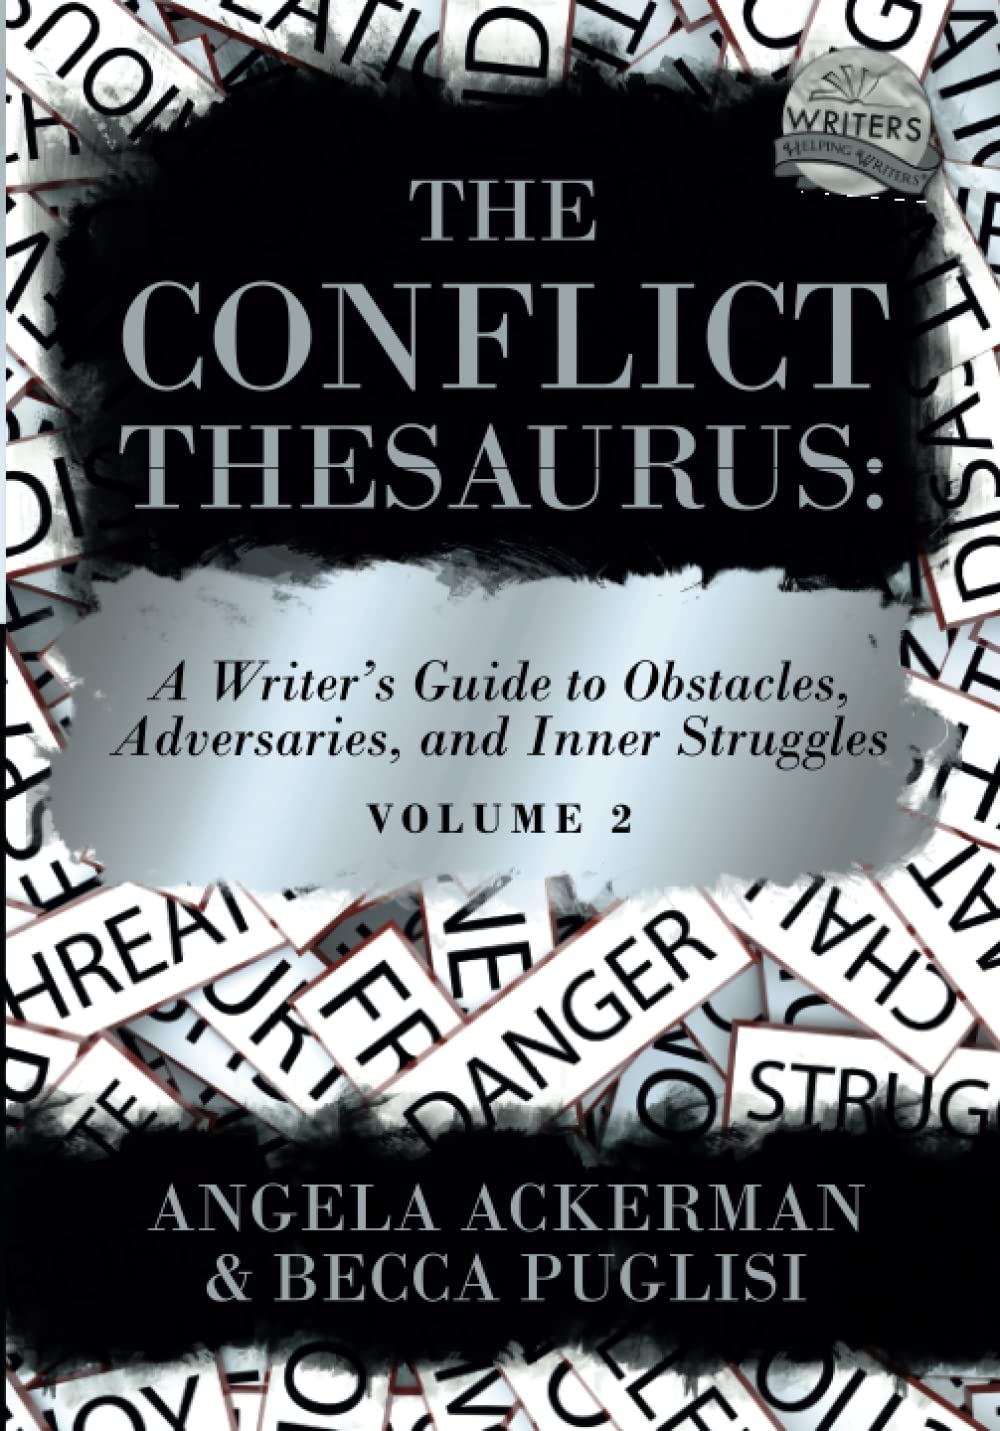 The Conflict Thesaurus: A Writer’s Guide to Obstacles, Adversaries, and Inner Struggles (Volume 2)